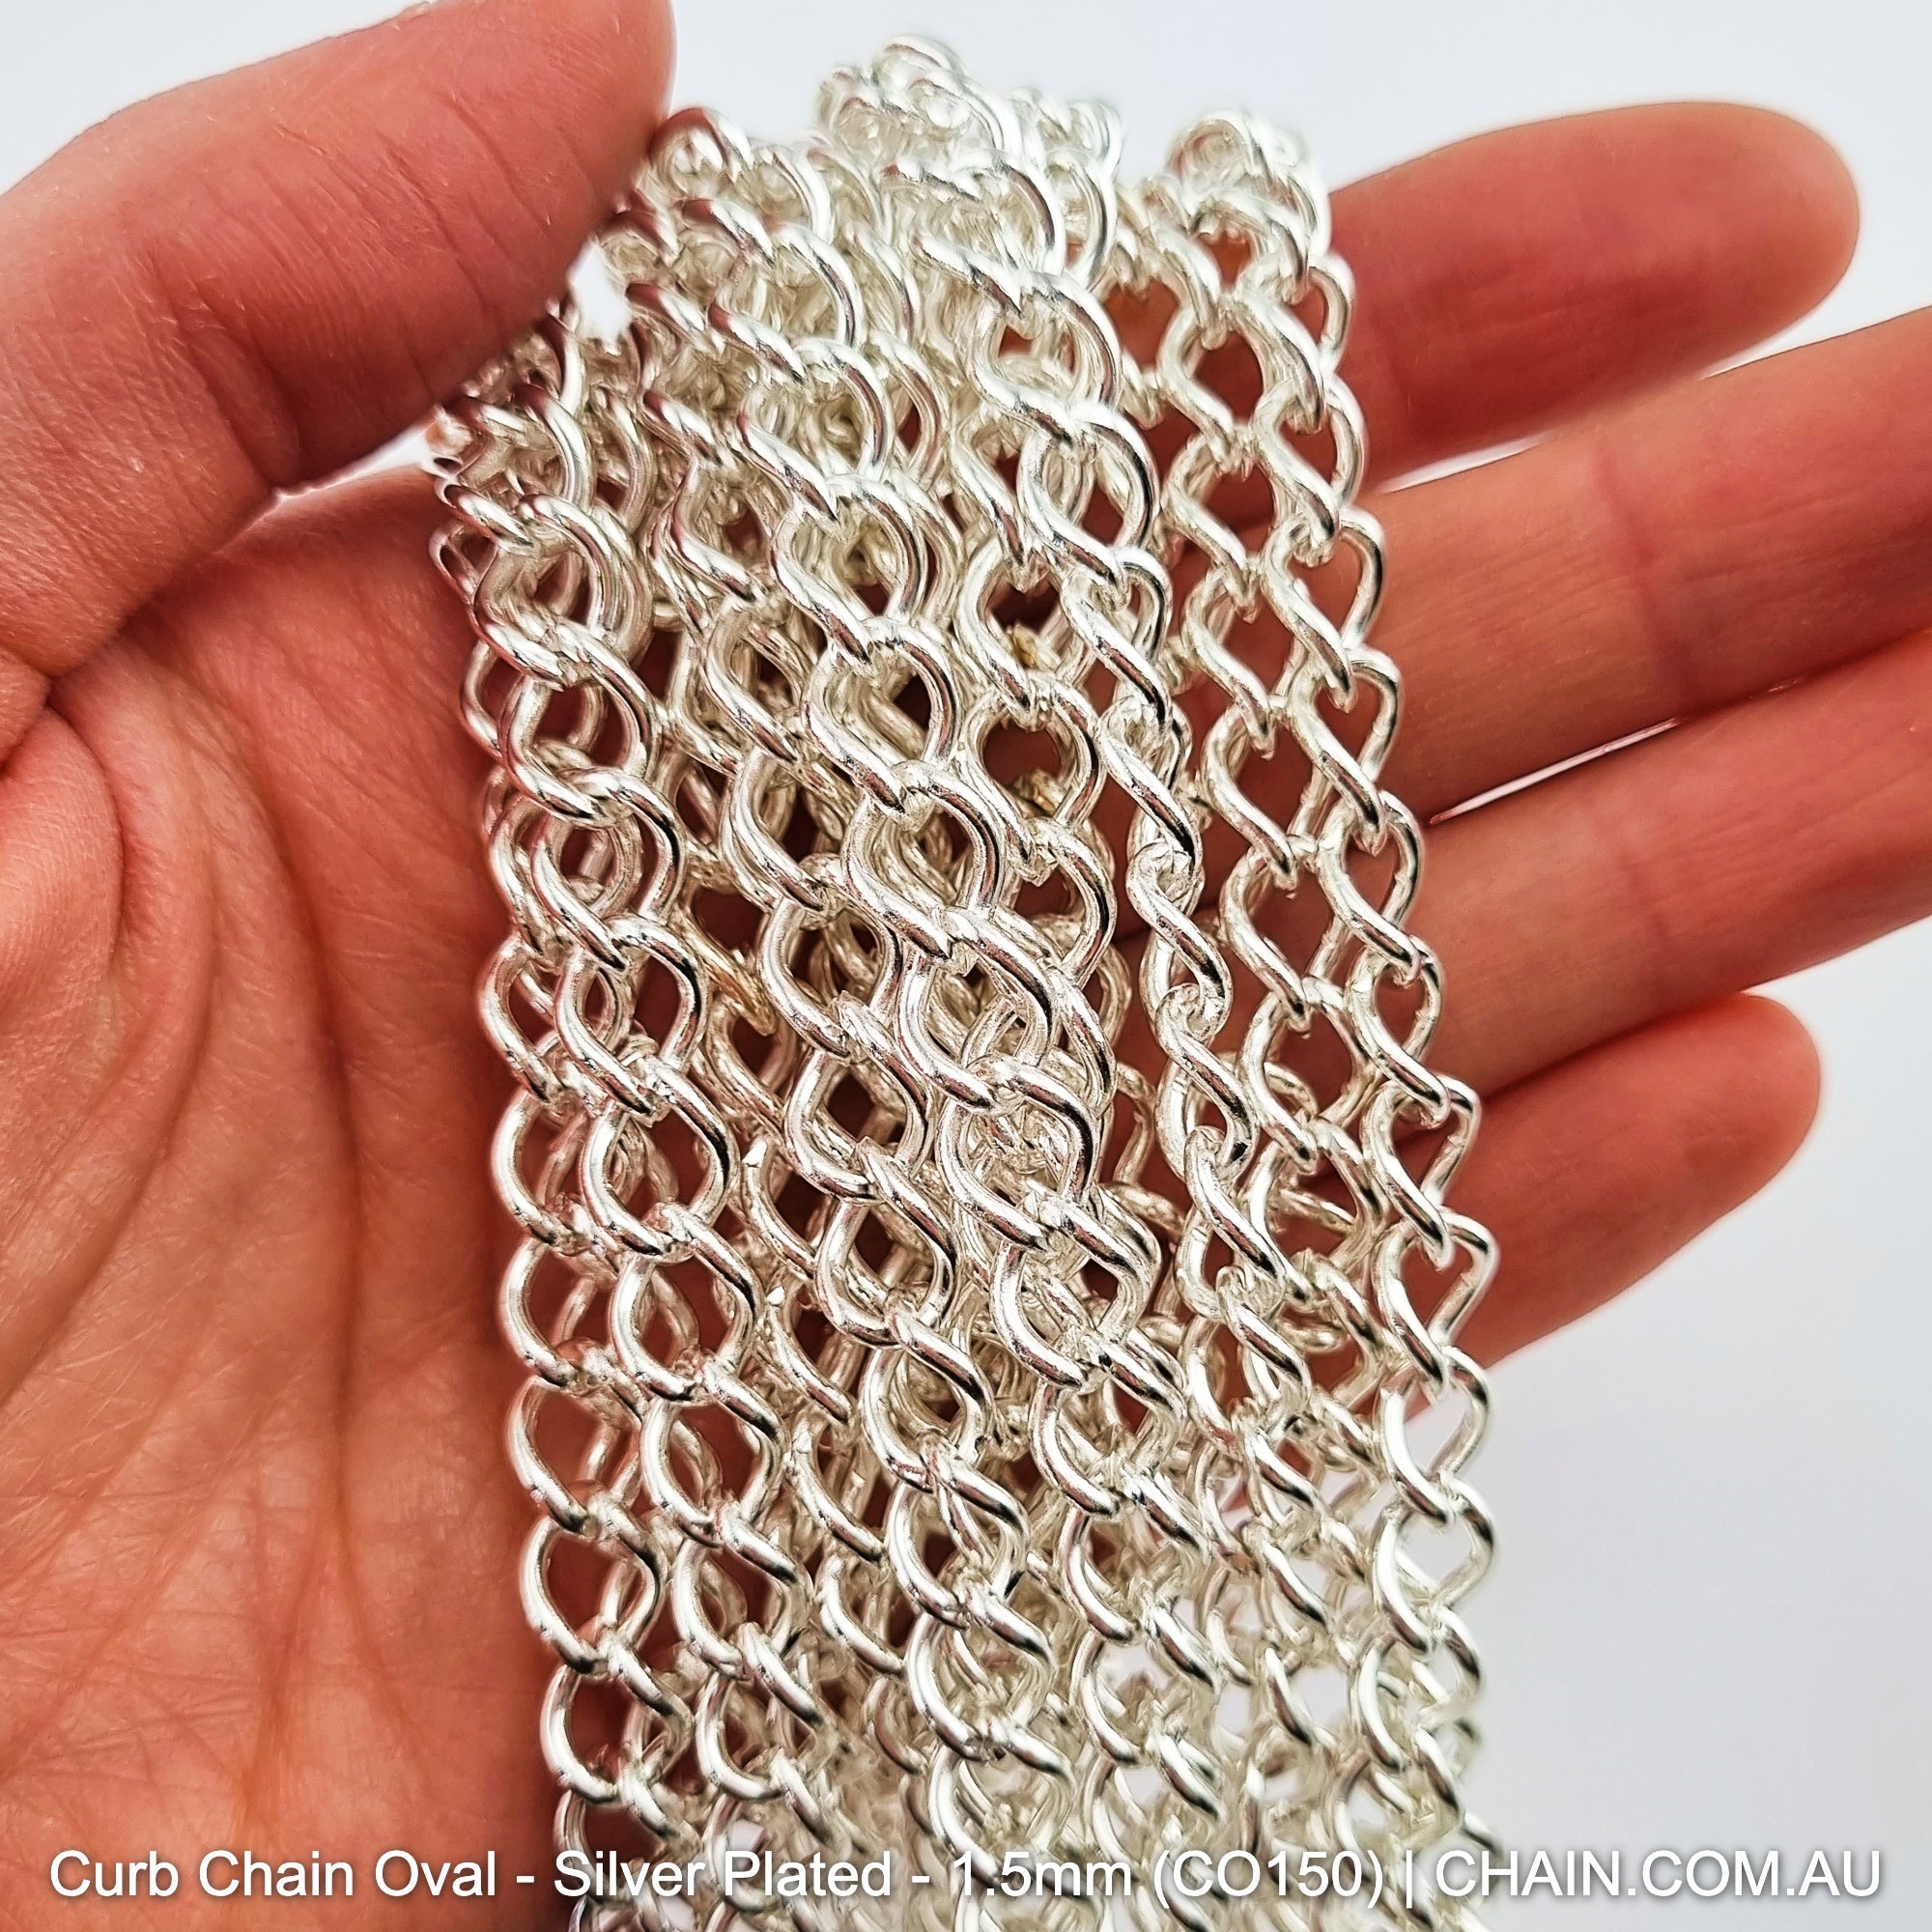 Curb Chain Oval - Silver Plated - Size: 1.5mm (CO150). Jewellery chain Australia. Shop chain online chain.com.au